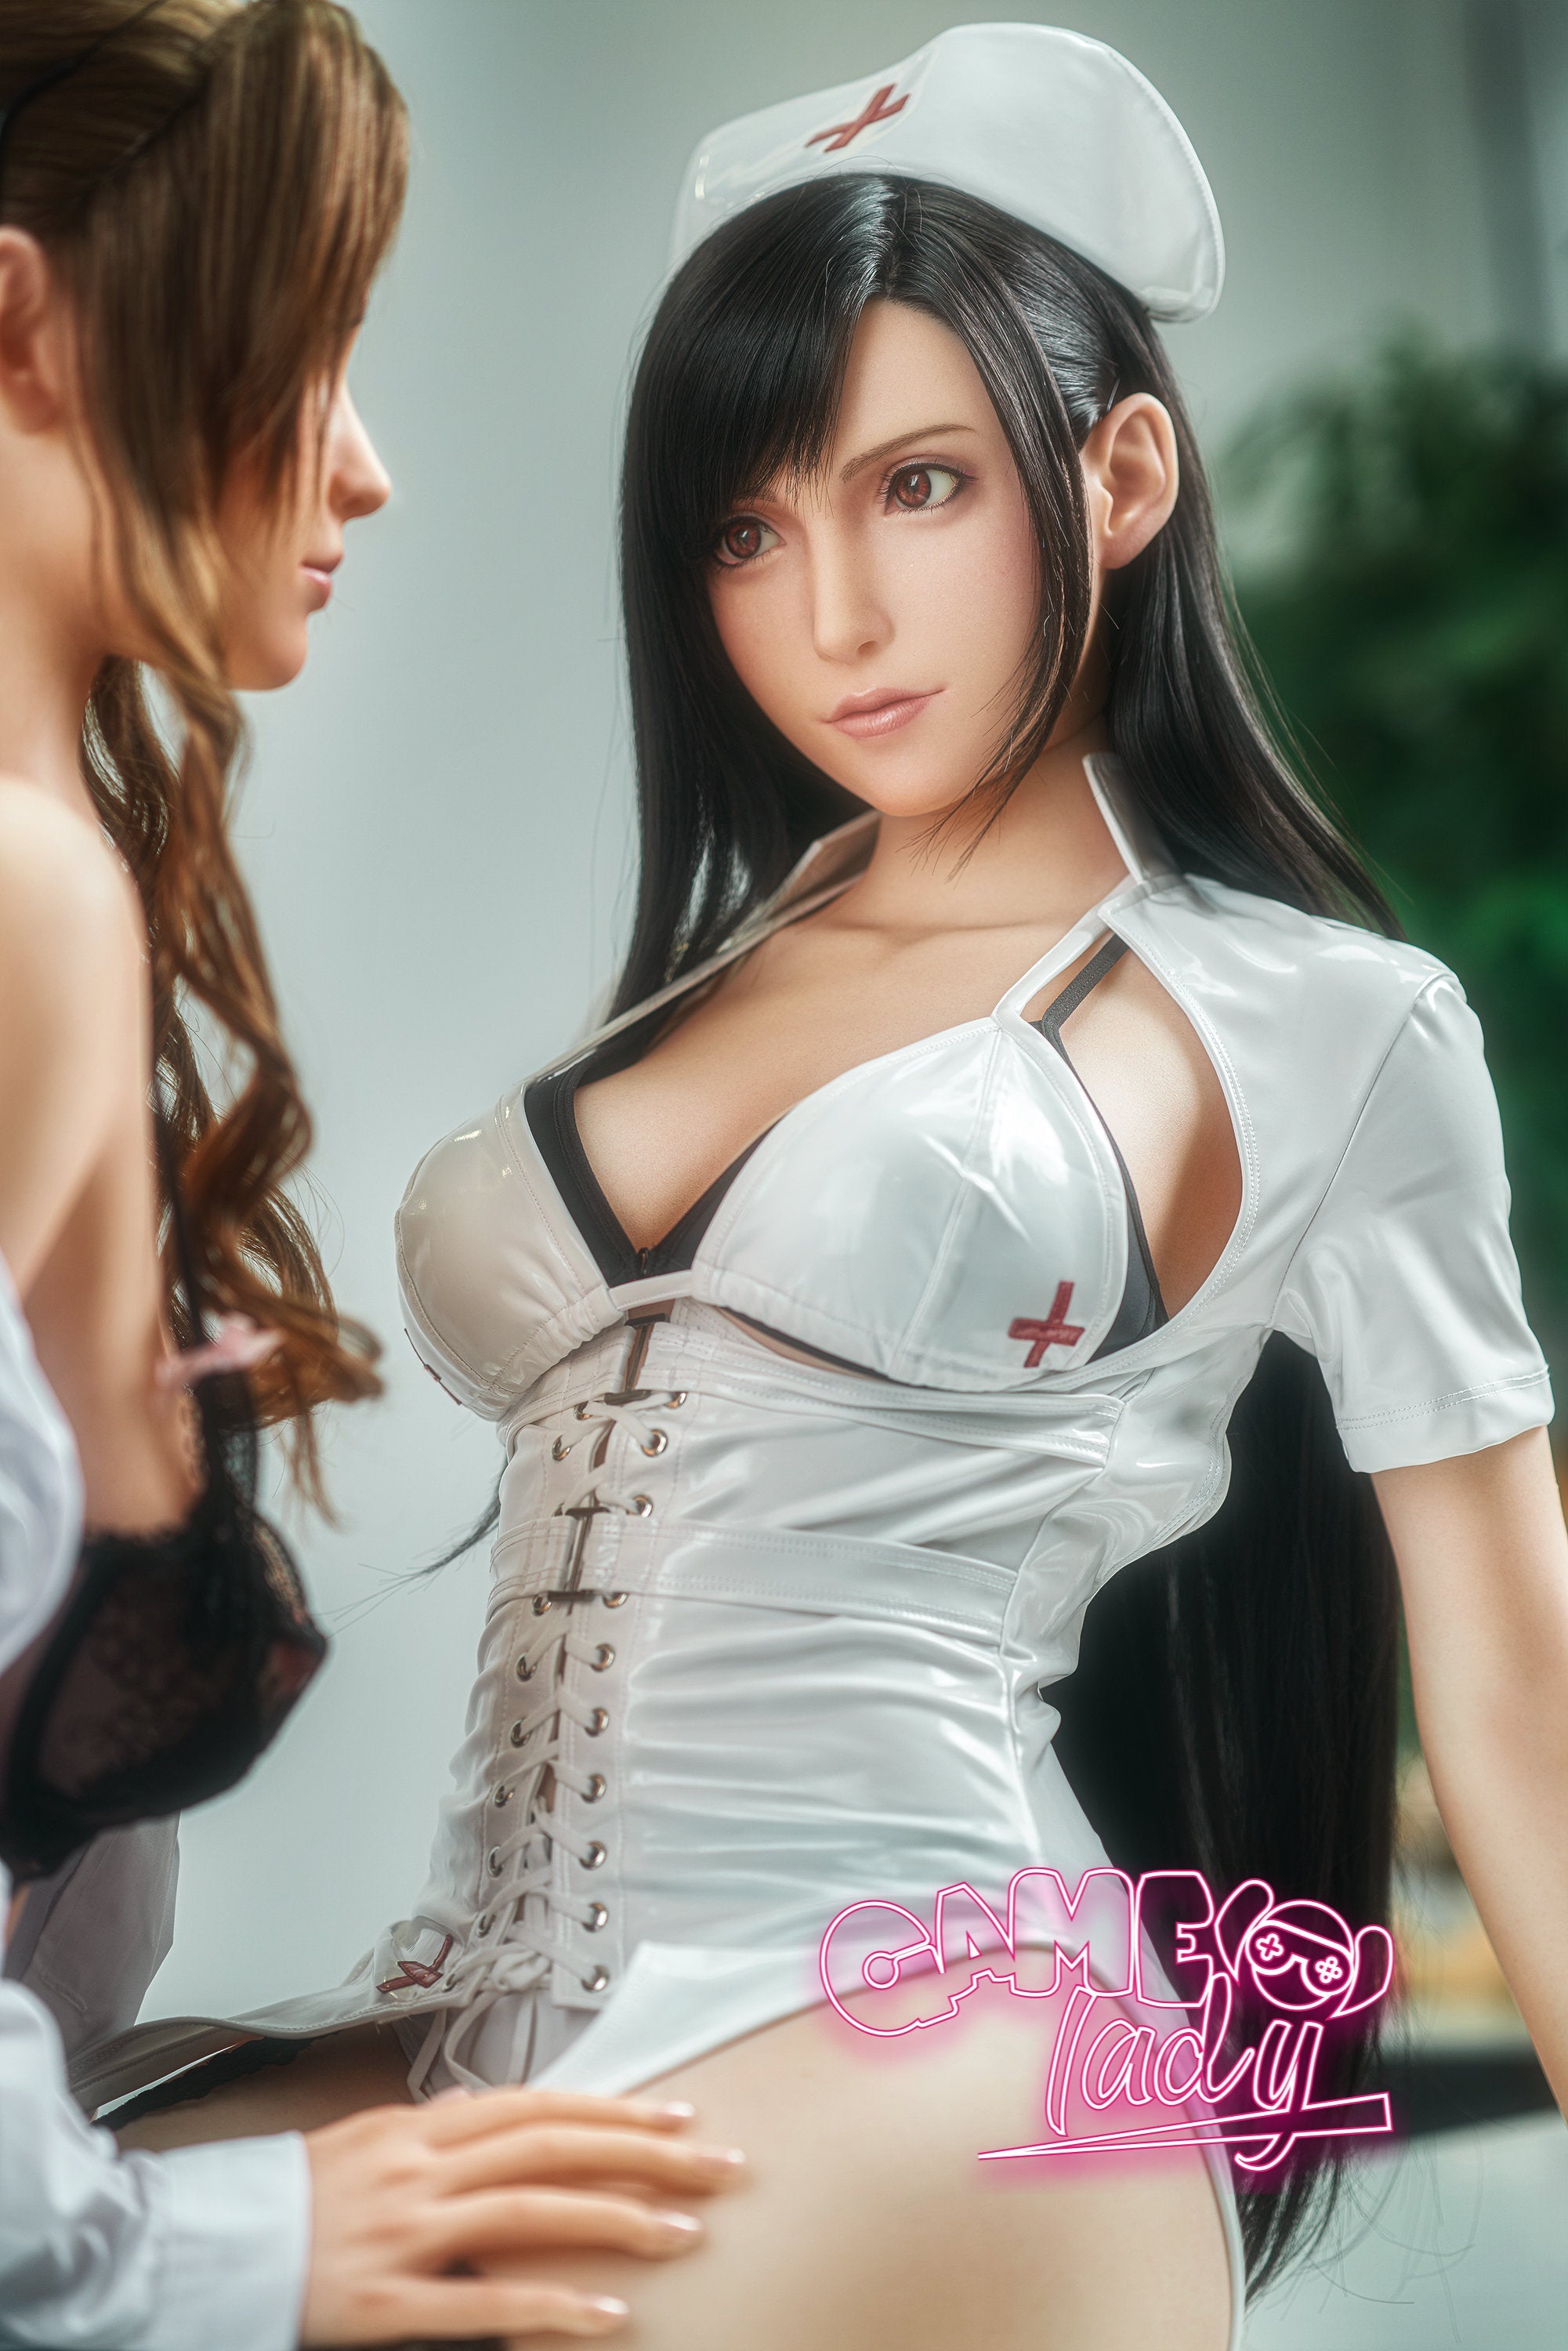 Game Lady Silicone - Tifa 167 cm & Aerith 168 cm | Buy Sex Dolls at DOLLS ACTUALLY